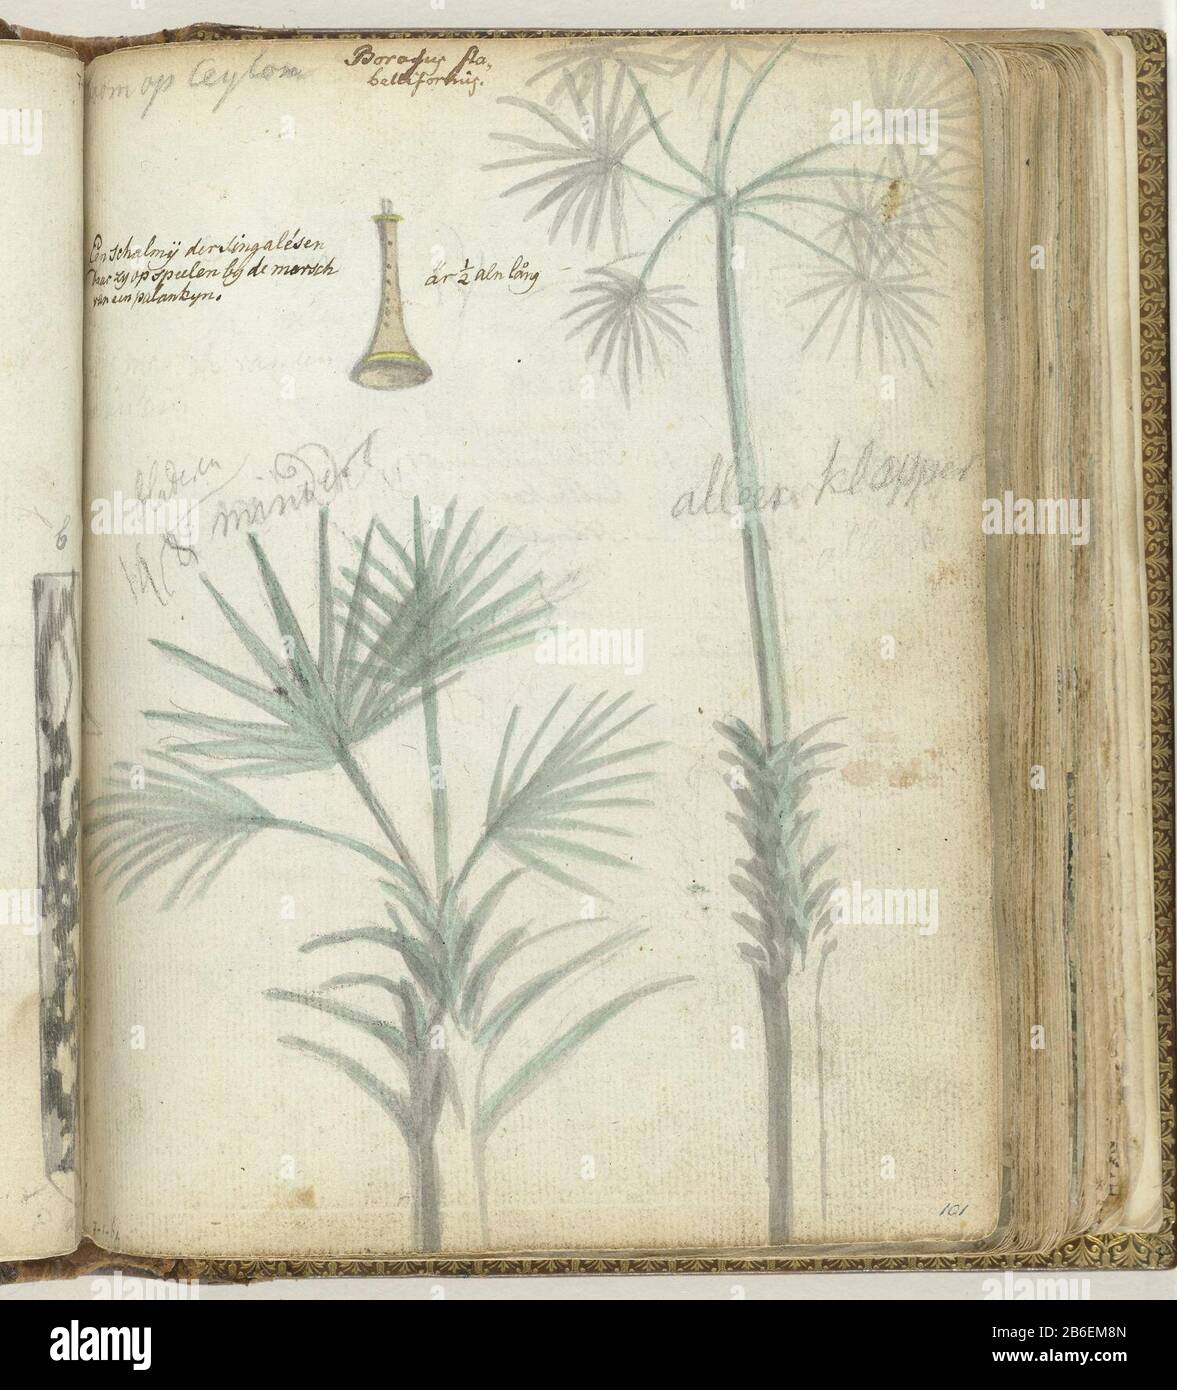 Tree in Ceylon Sinhalese schalmij Color Drawing of a (coconut) tree and a wind instrument Where: Music is played on march for the carriers of a palanquin. With inscription. Part of the sketchbook of Jan Brandes, Vol. 1 (1808), p. 101 and see Part 2, p. 136. Manufacturer : artist: Jan BrandesPlaats manufacture: Sri Lanka Date: Dec 1785 Physical features: watercolor on sketch in pencil, paintbrush color material: Paper Pencil Technique: Brush dimensions: H 195 mm × W 155 mm Date: 1785 - 1786 Stock Photo